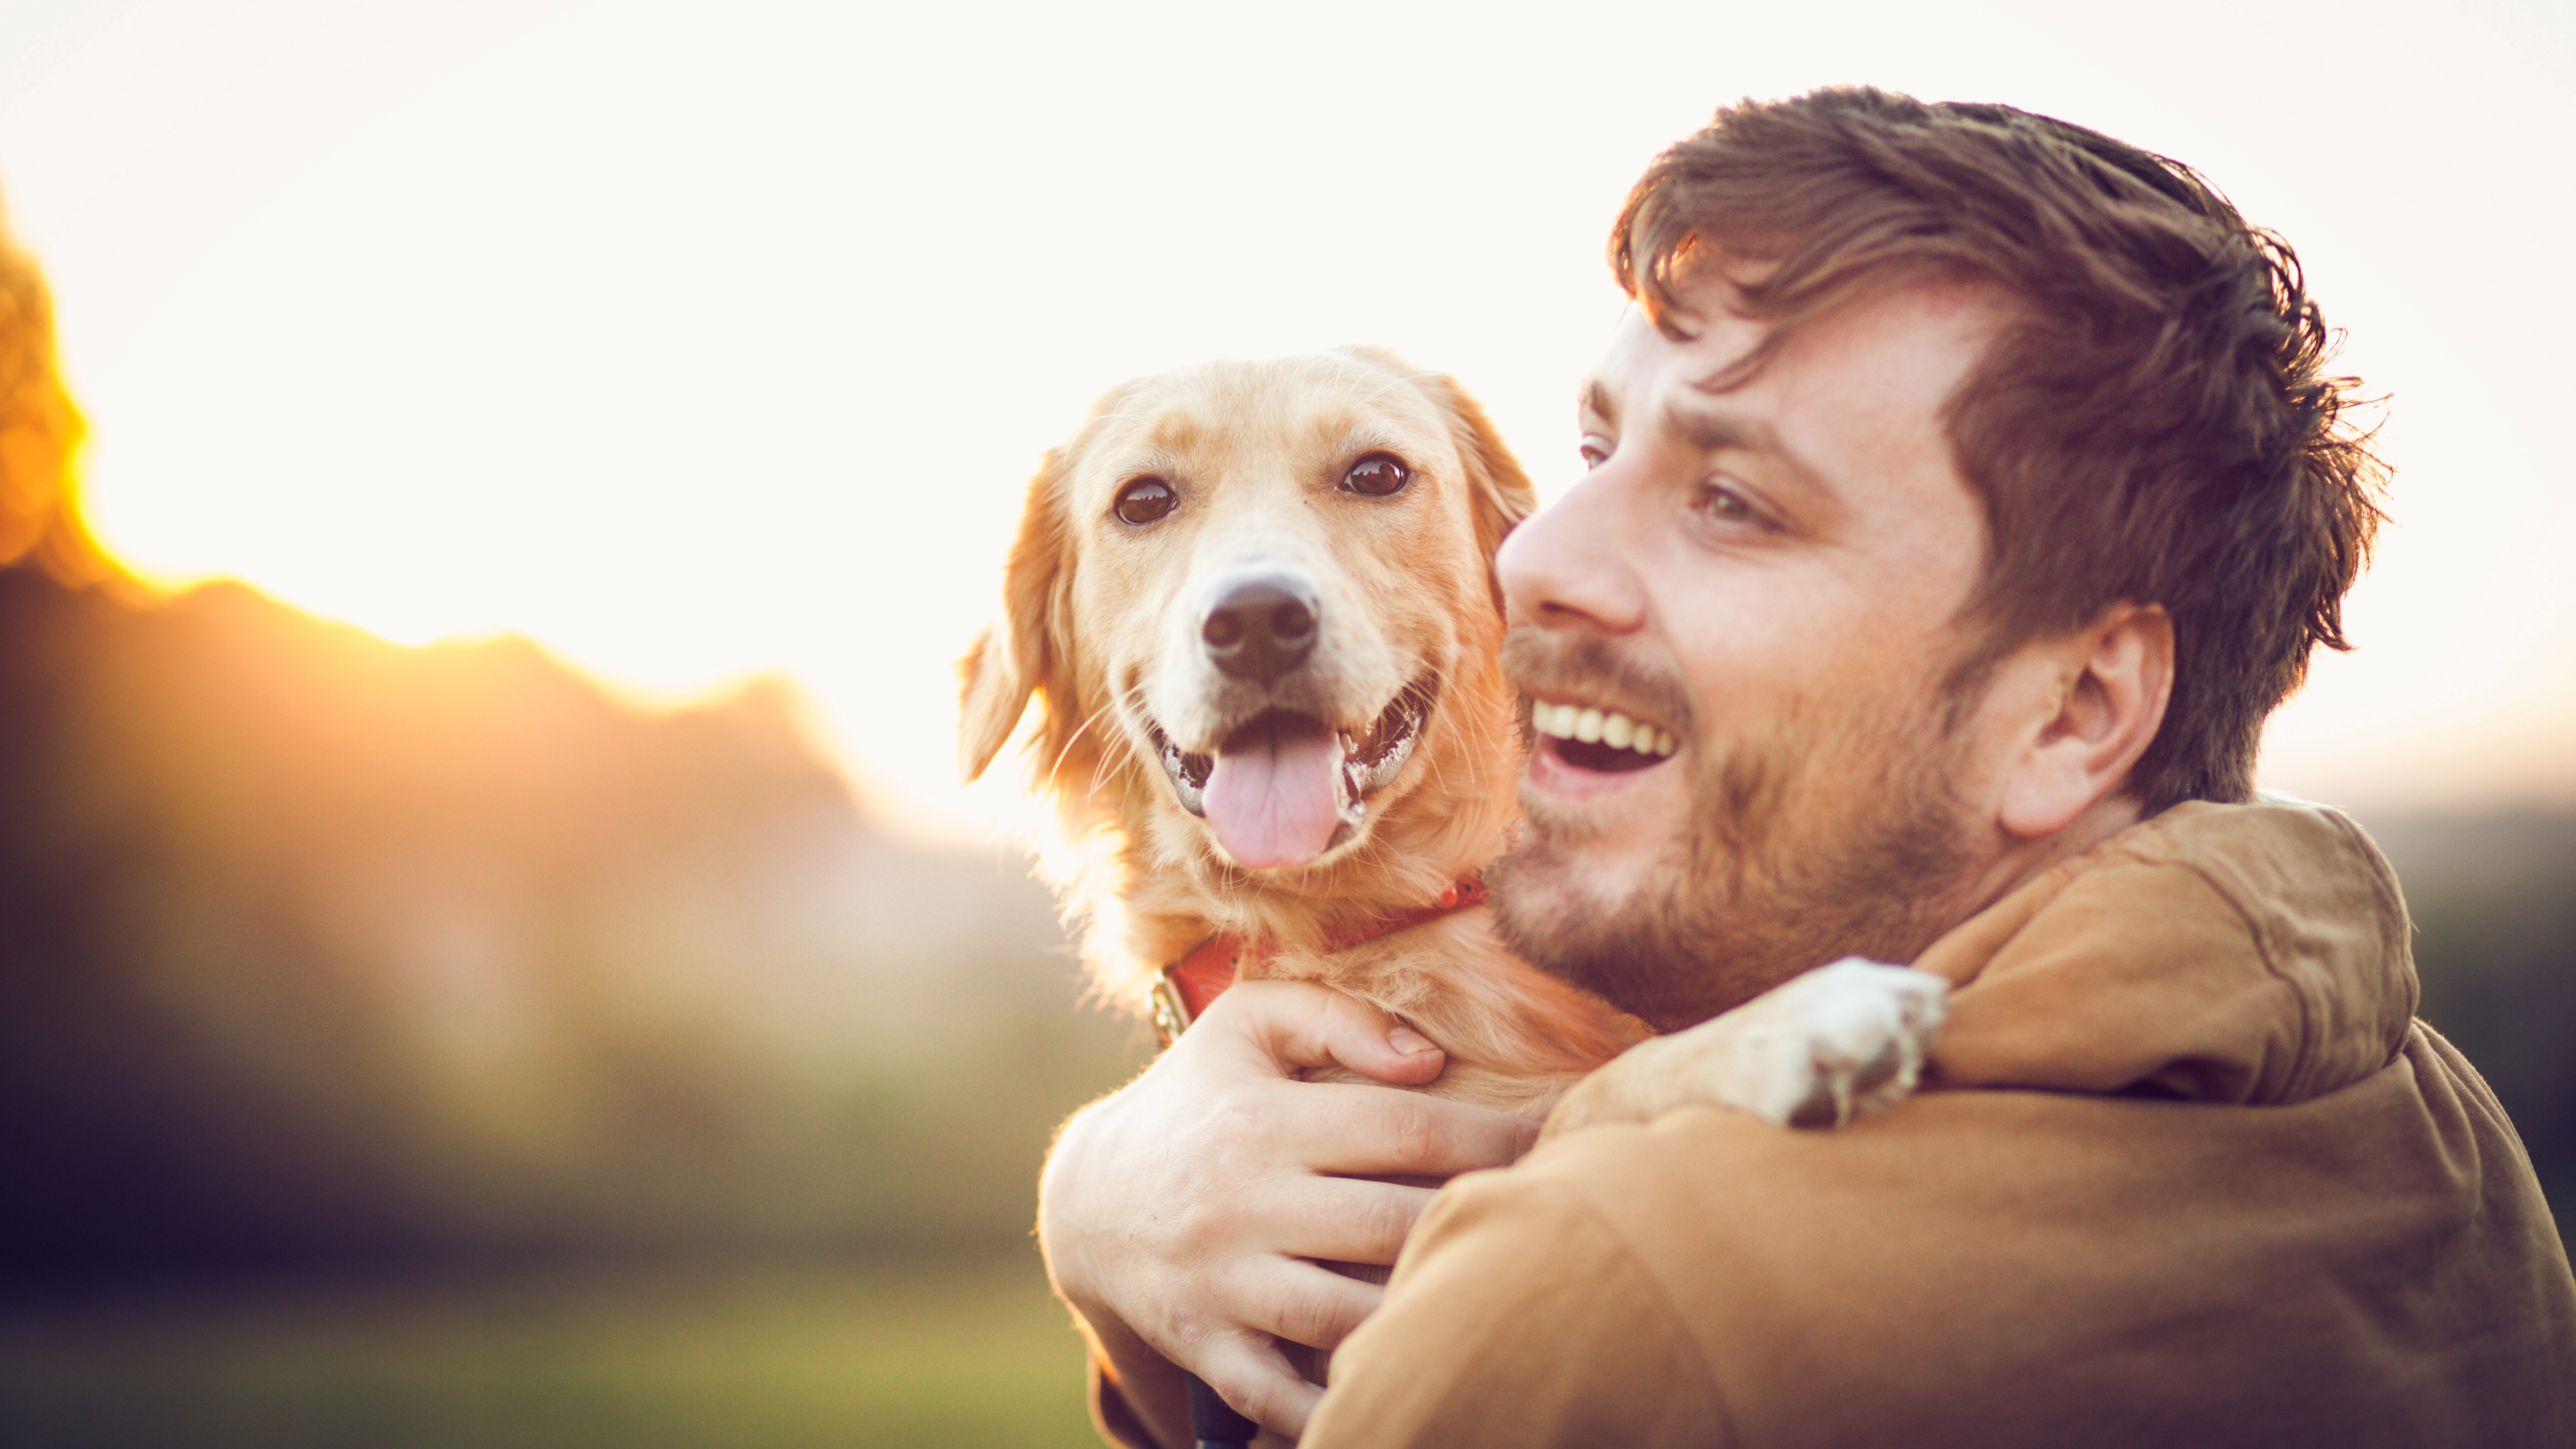 Trainer reveals the one thing you should never do if you want a happier relationship with your dog